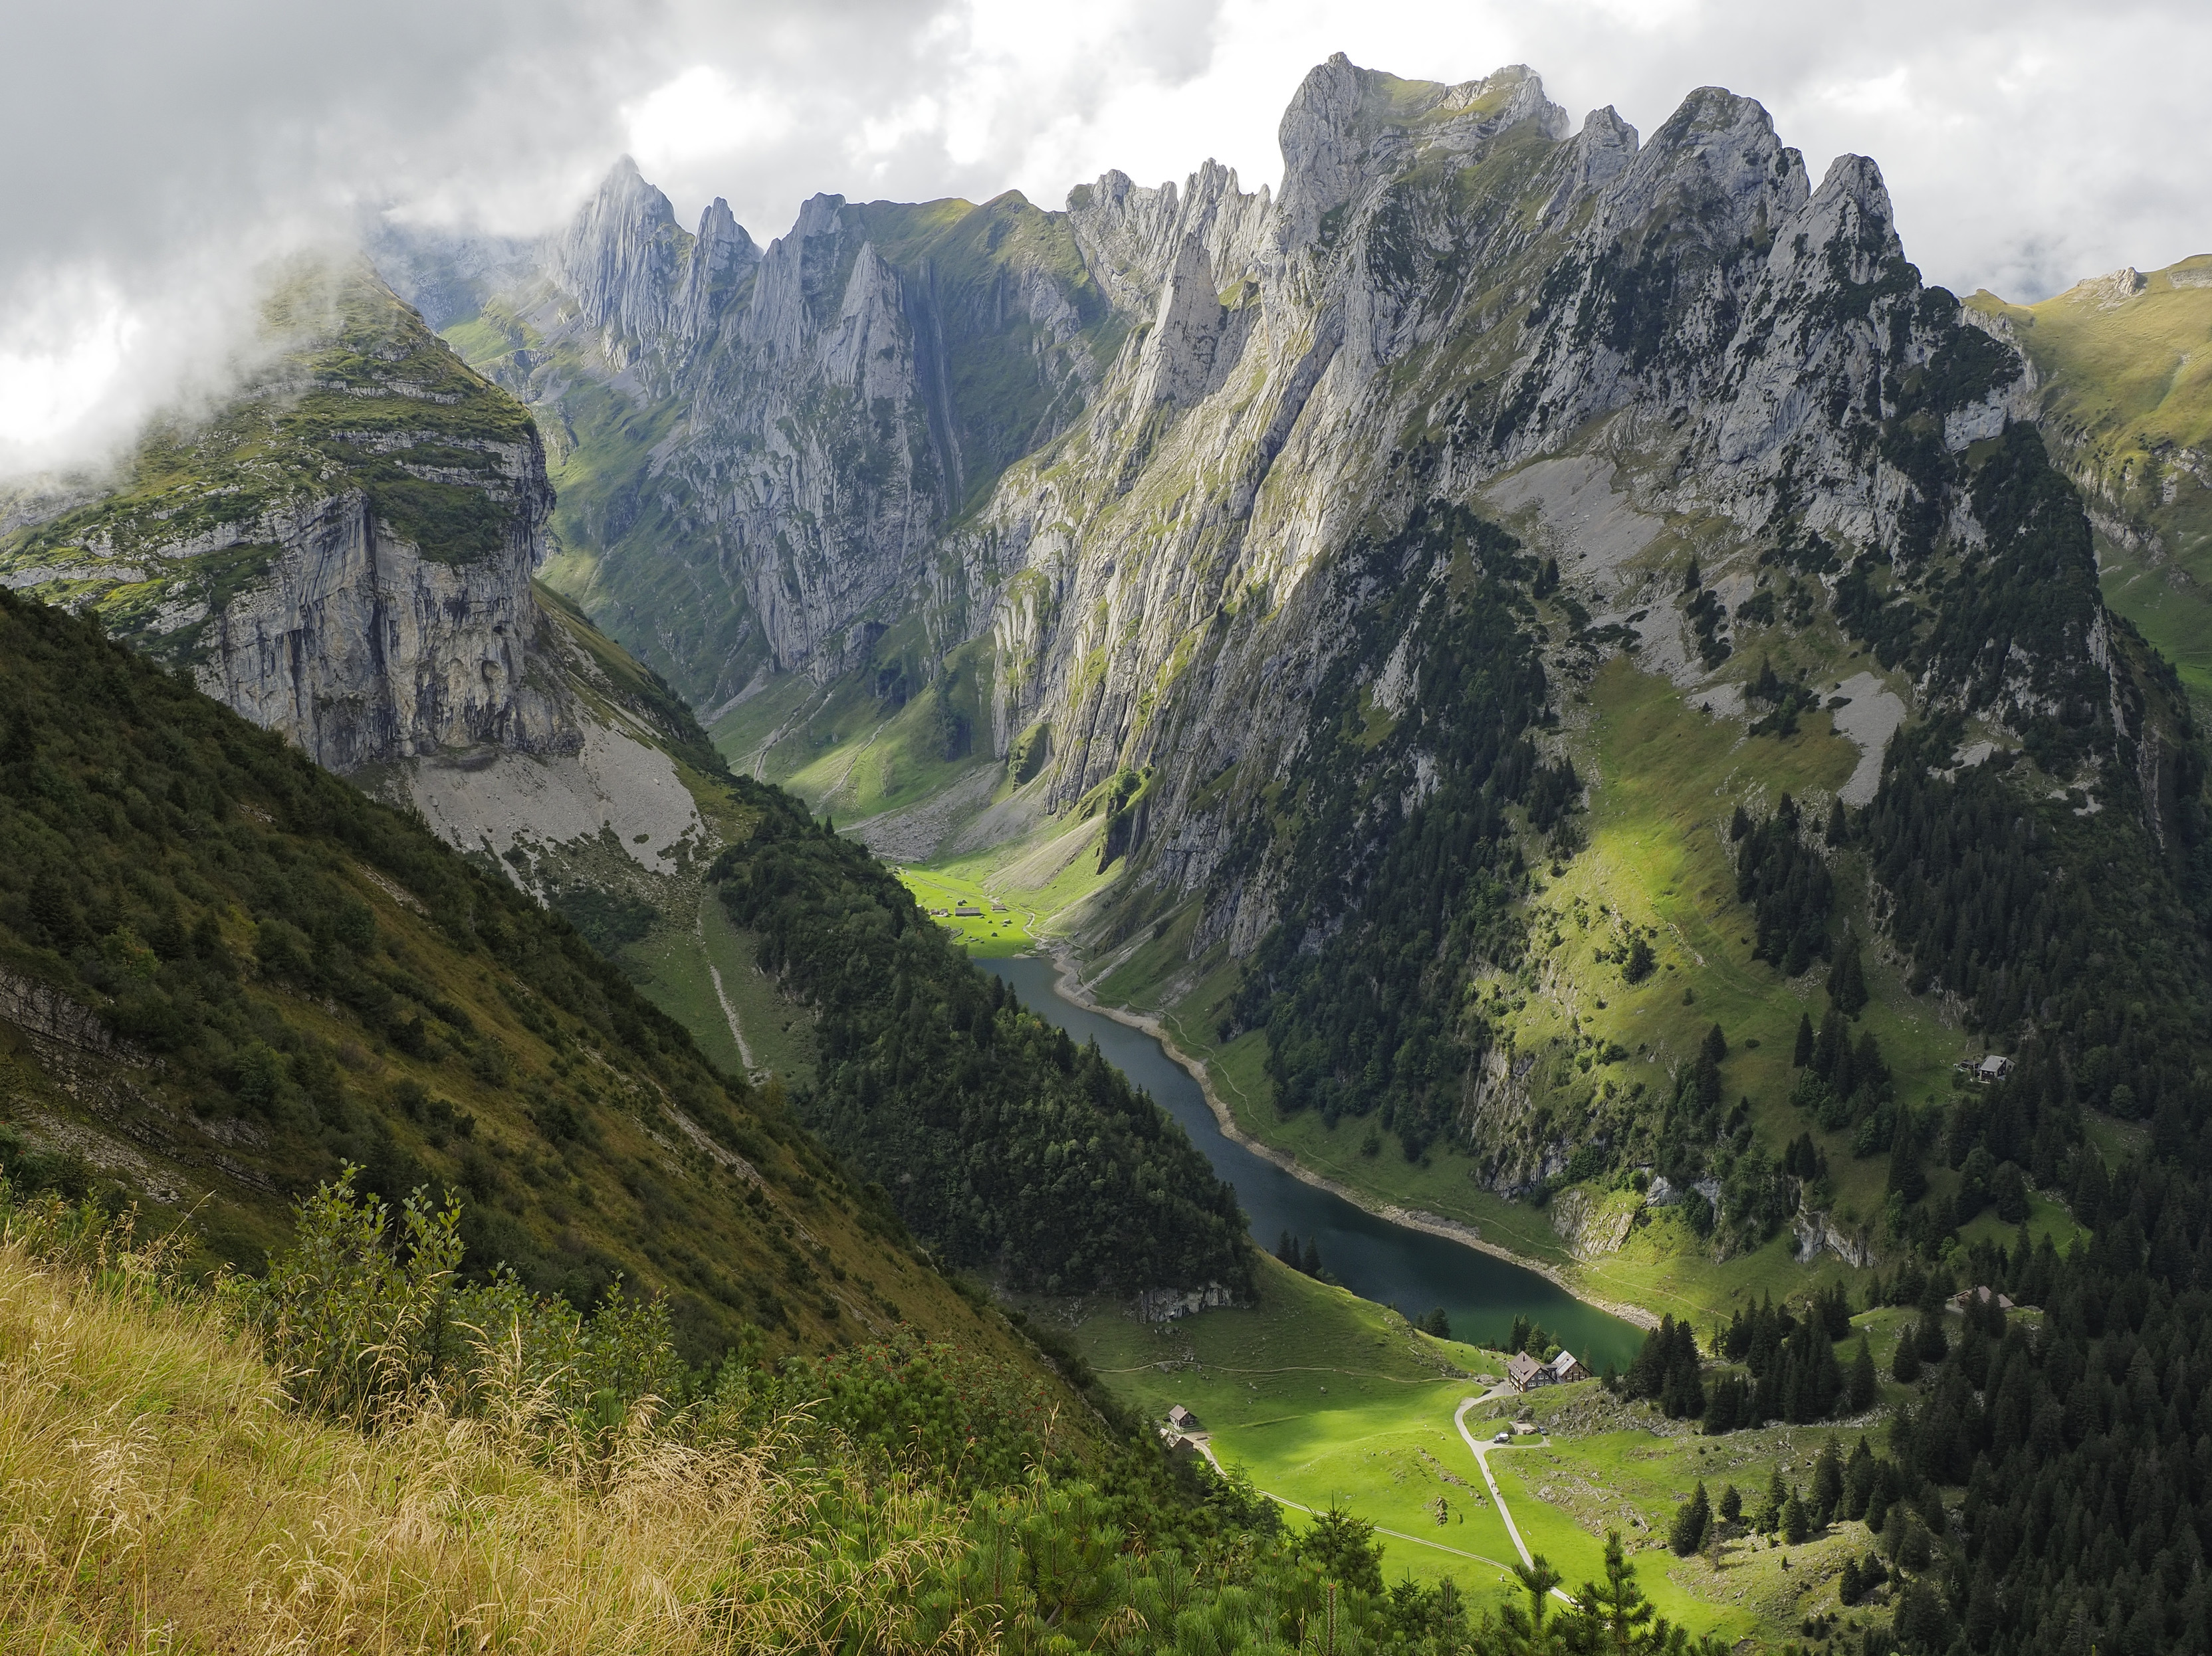 Landscape of the Alpstein region in the Canton of Appenzell. View of the Wideralpstöck mountains and Fählensee lake. Photo taken from a hike last week. More on this hike here: https://swissfamilyfun.com/saxer-lucke-hike/